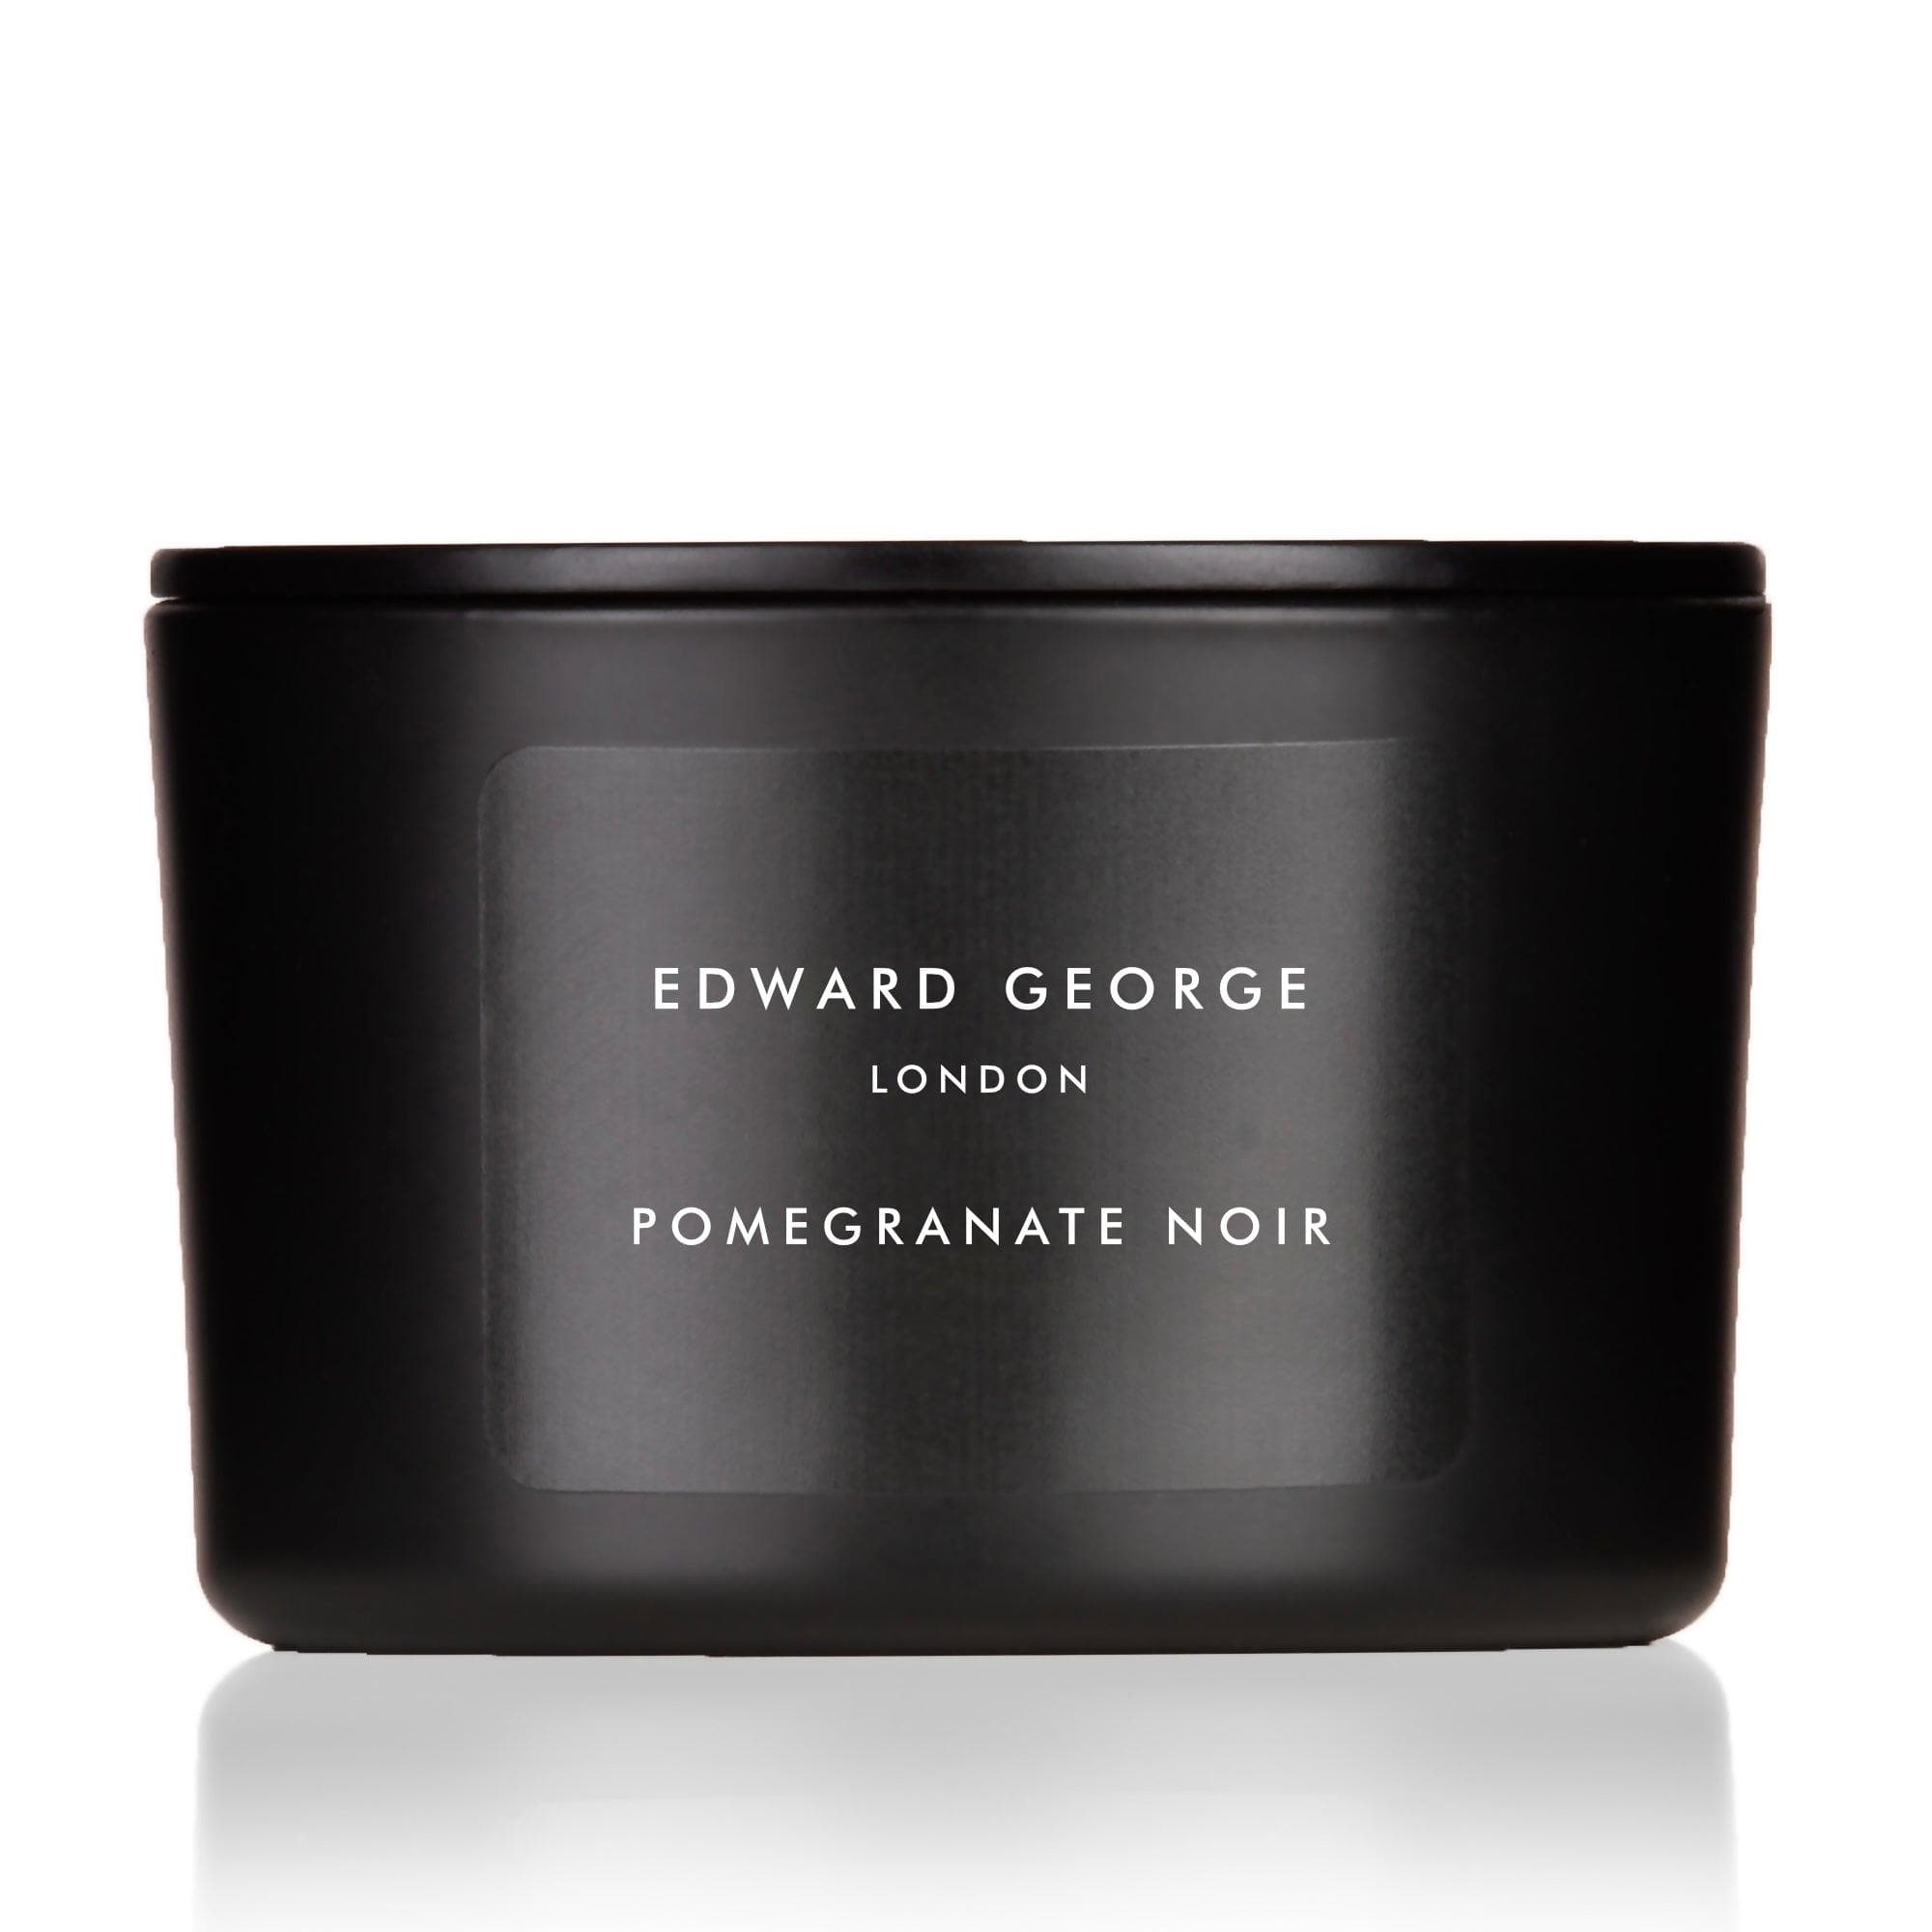 pomegrante noir candles home fragrance decor room living room edward george london luxury gift ritual scent set lid zinc alloy black wax best black scented candle women men small